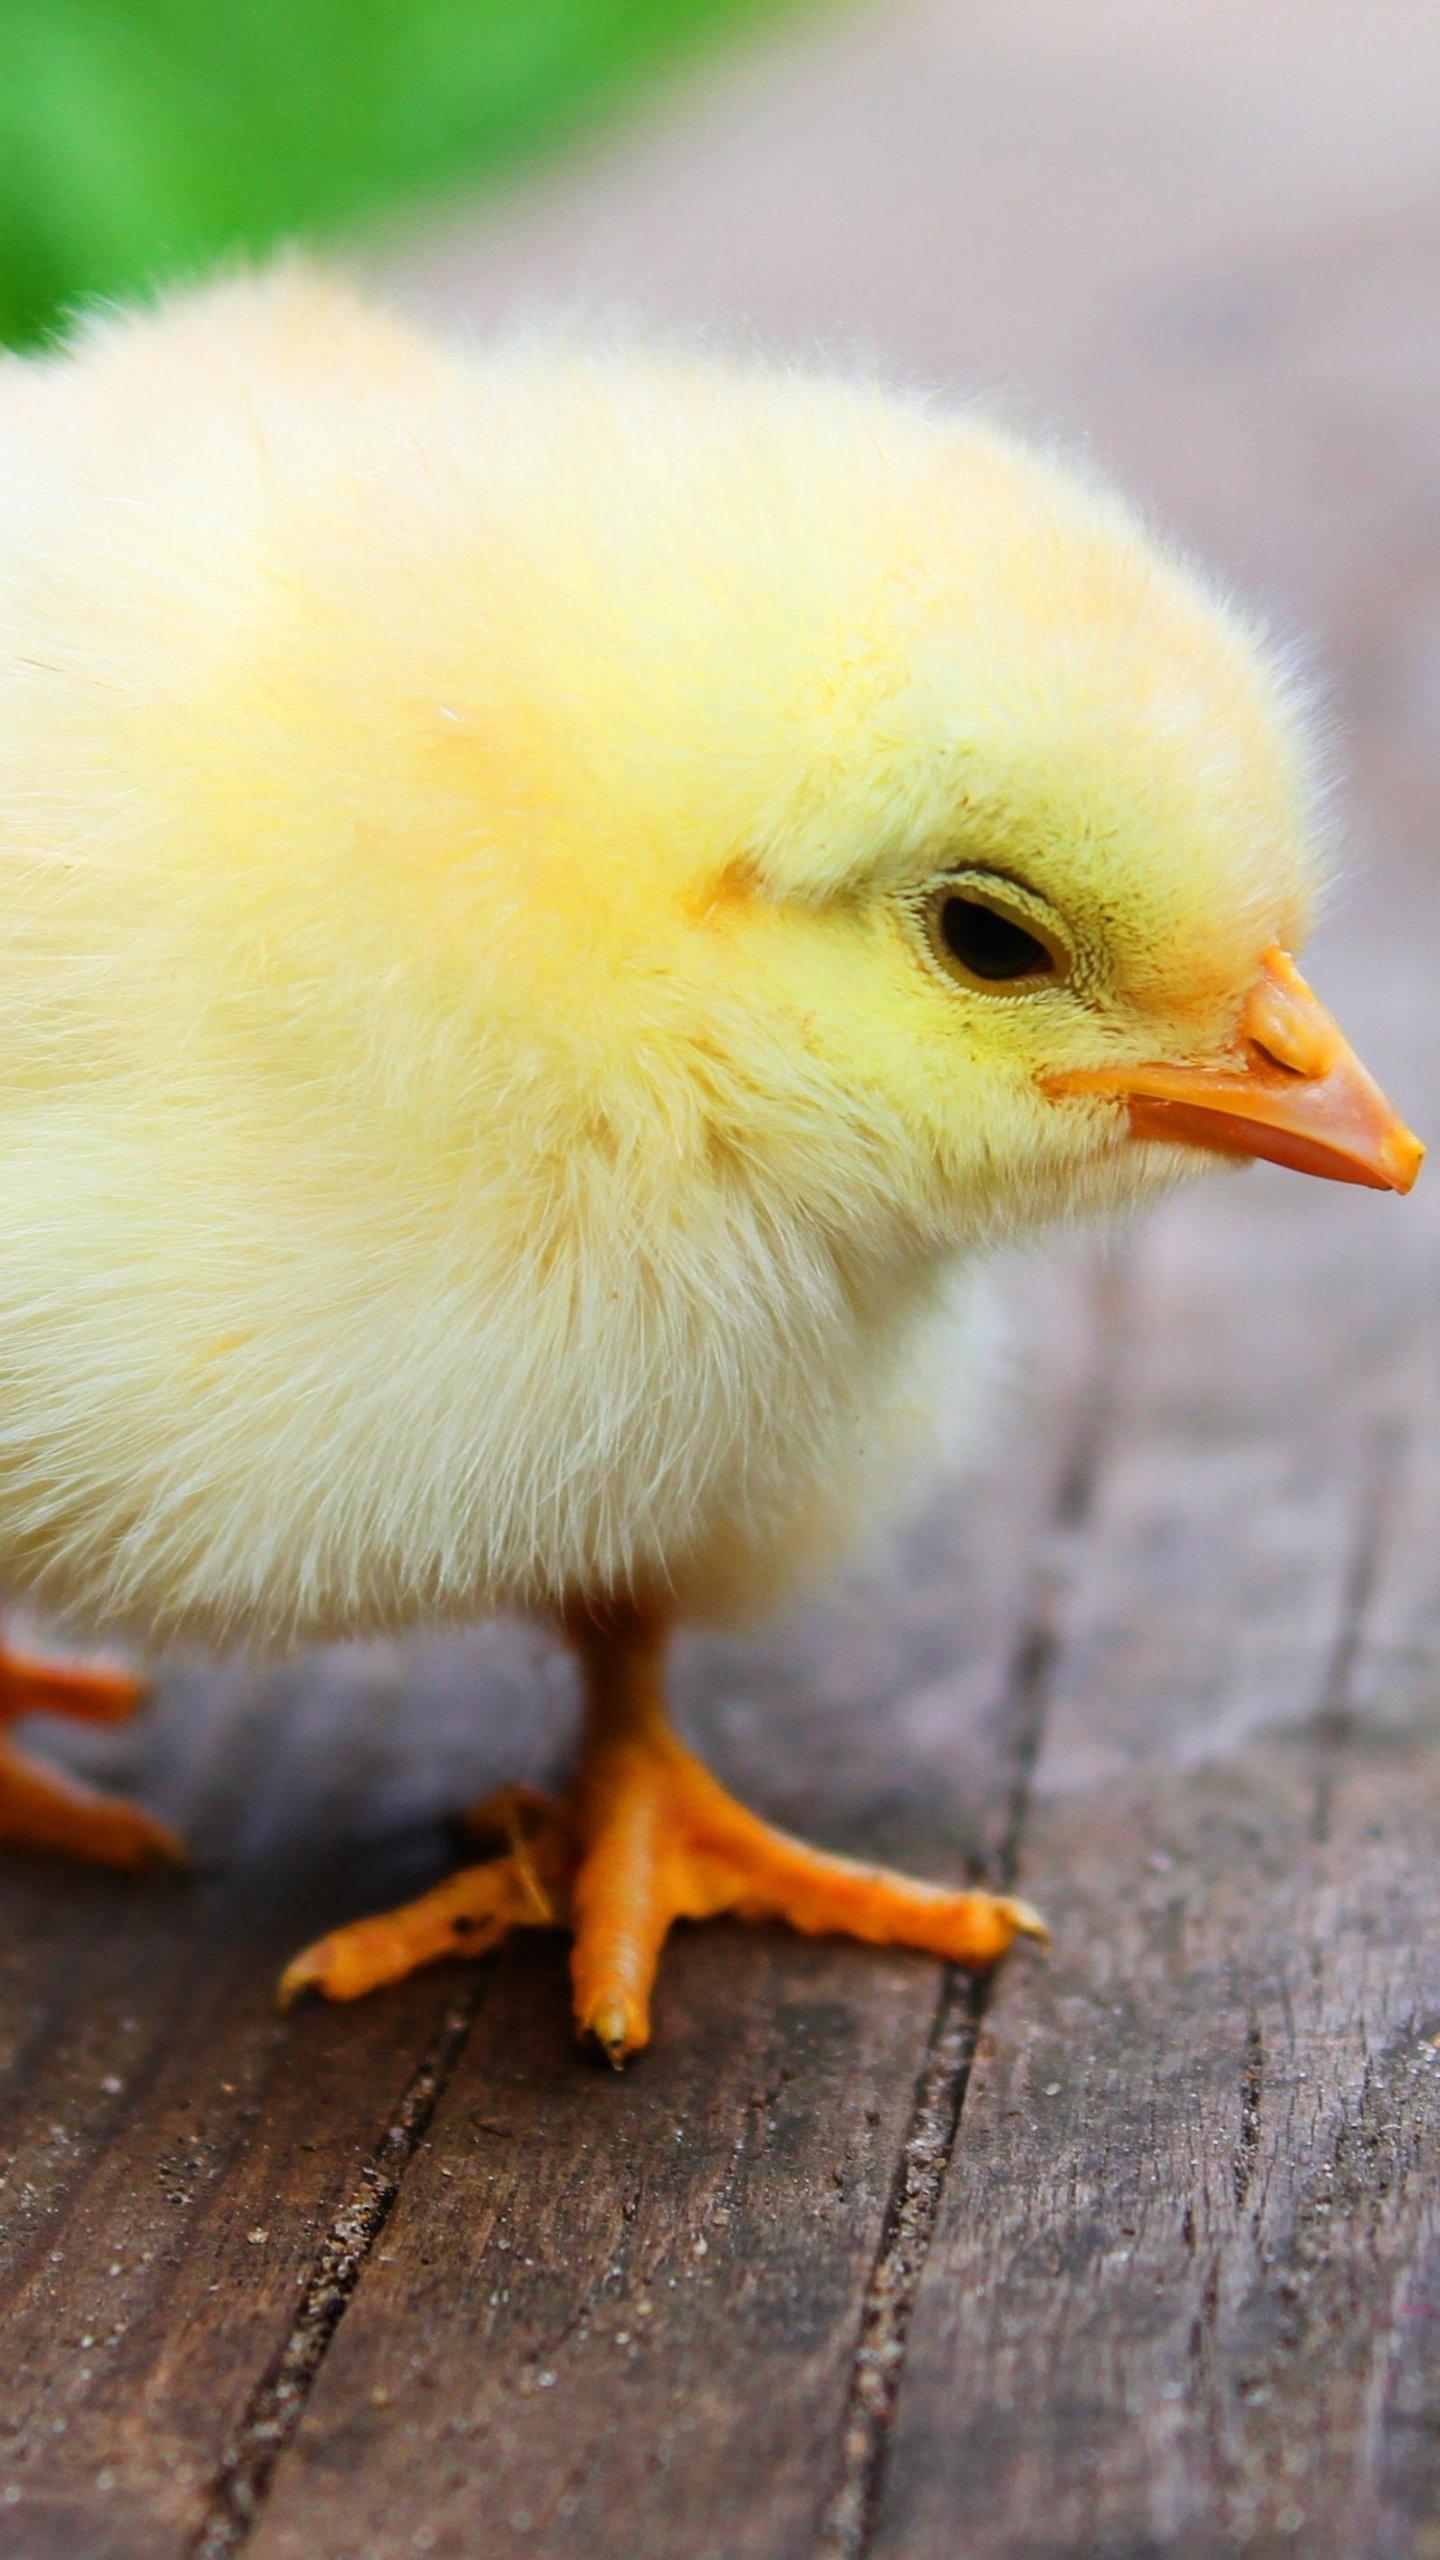 Chick Hd Wallpaper 4k For Pc, Chick, Animal